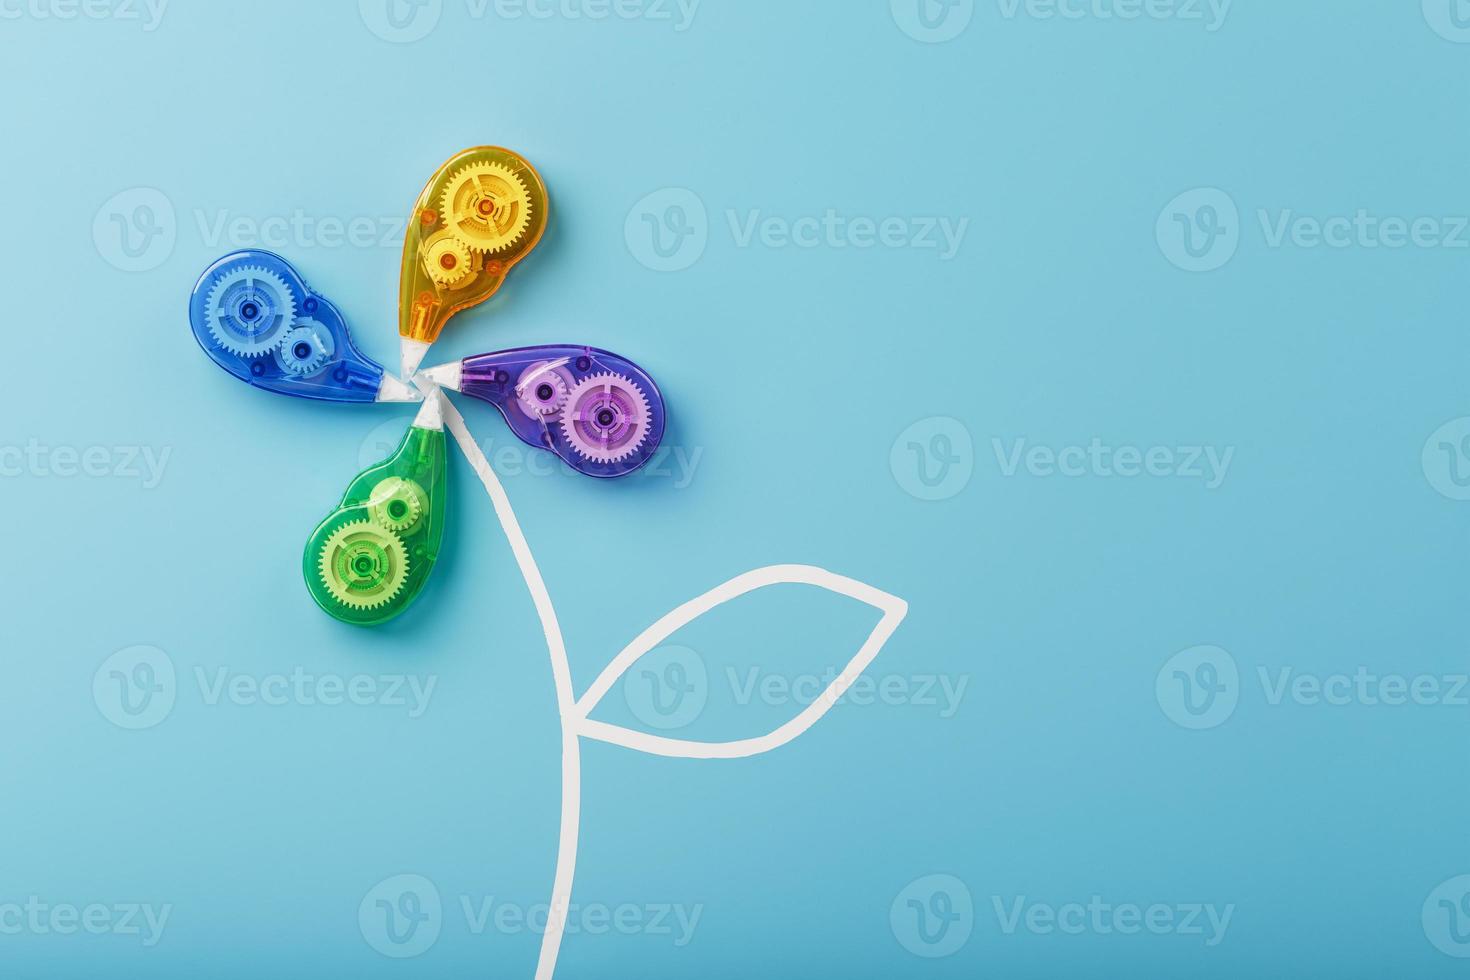 Stationery correction tapes in the shape of a flower of different colors on a blue background. photo